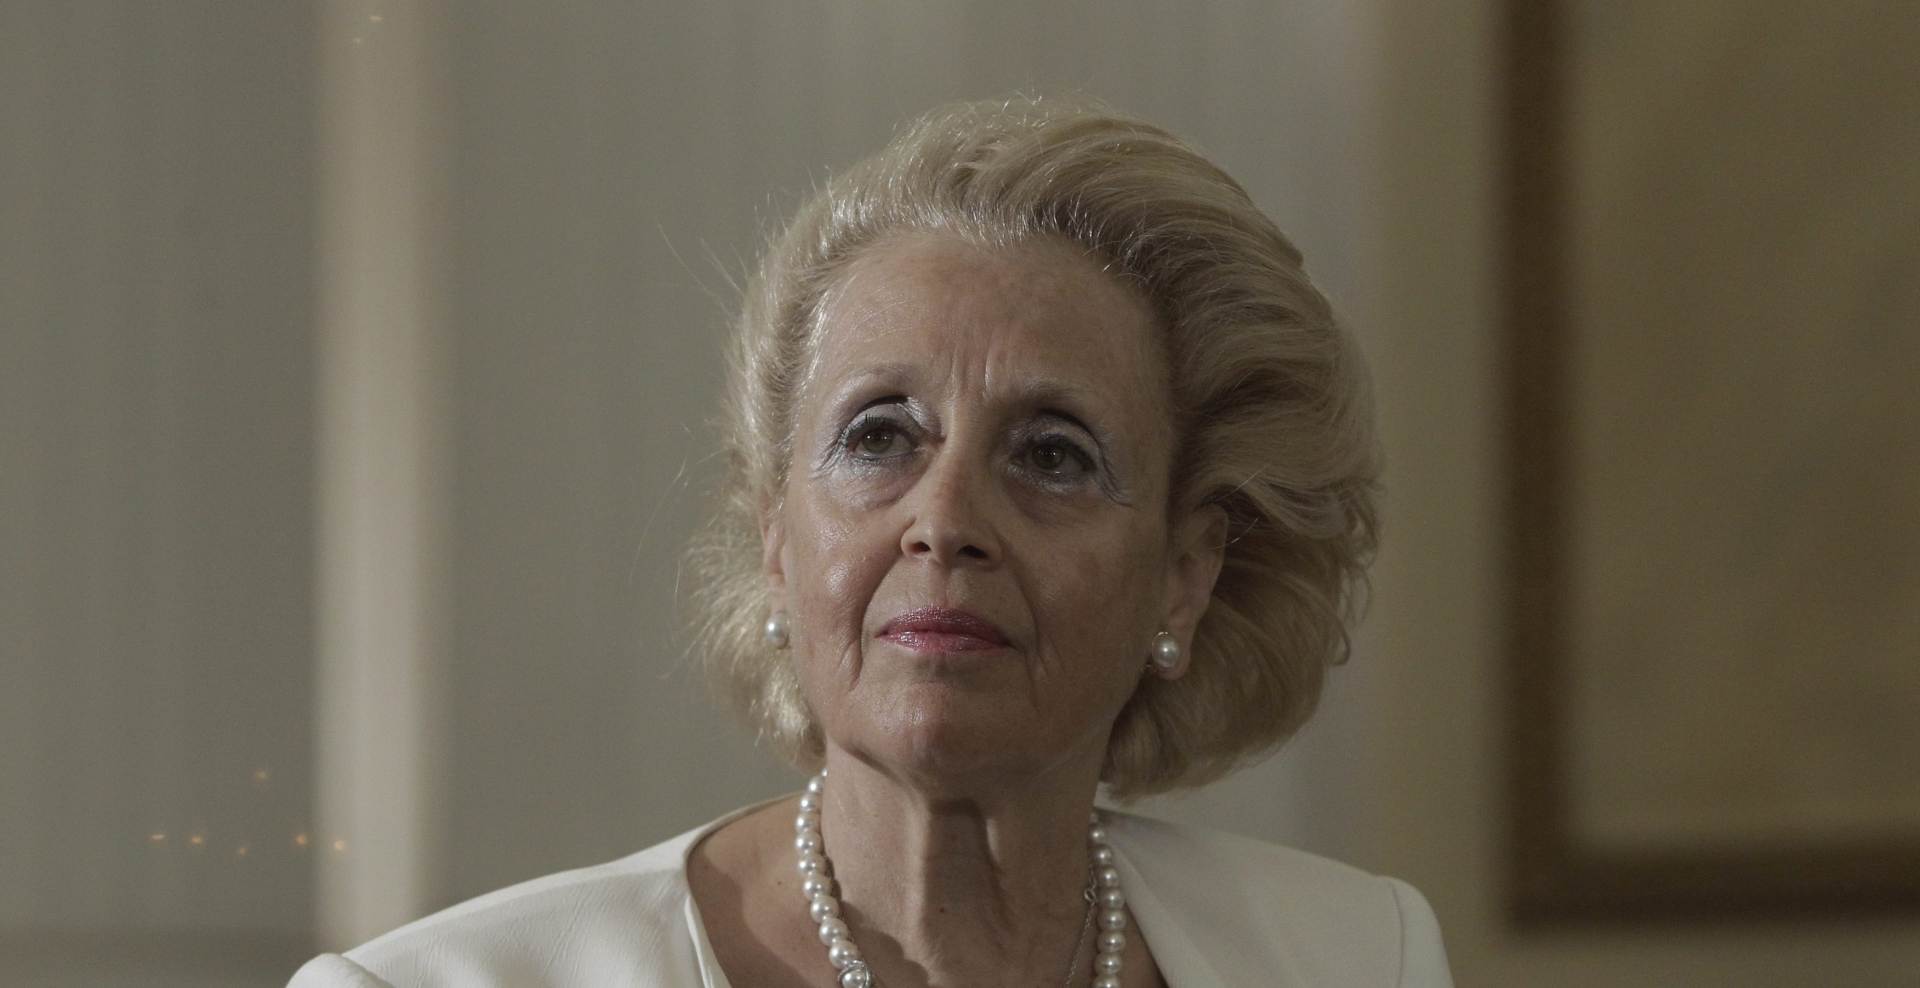 epa04900943 Greece's Supreme Court president Vassiliki Thanou looks on during her swearing in ceremony as caretaker Prime Minister in Athens, Greece, 27 August 2015. Thanou who becomes the country's first female prime minister, was named the head of a caretaker government to lead the country to elections expected next month, the president's office said on 27 August 2015.  EPA/YANNIS KOLESIDIS